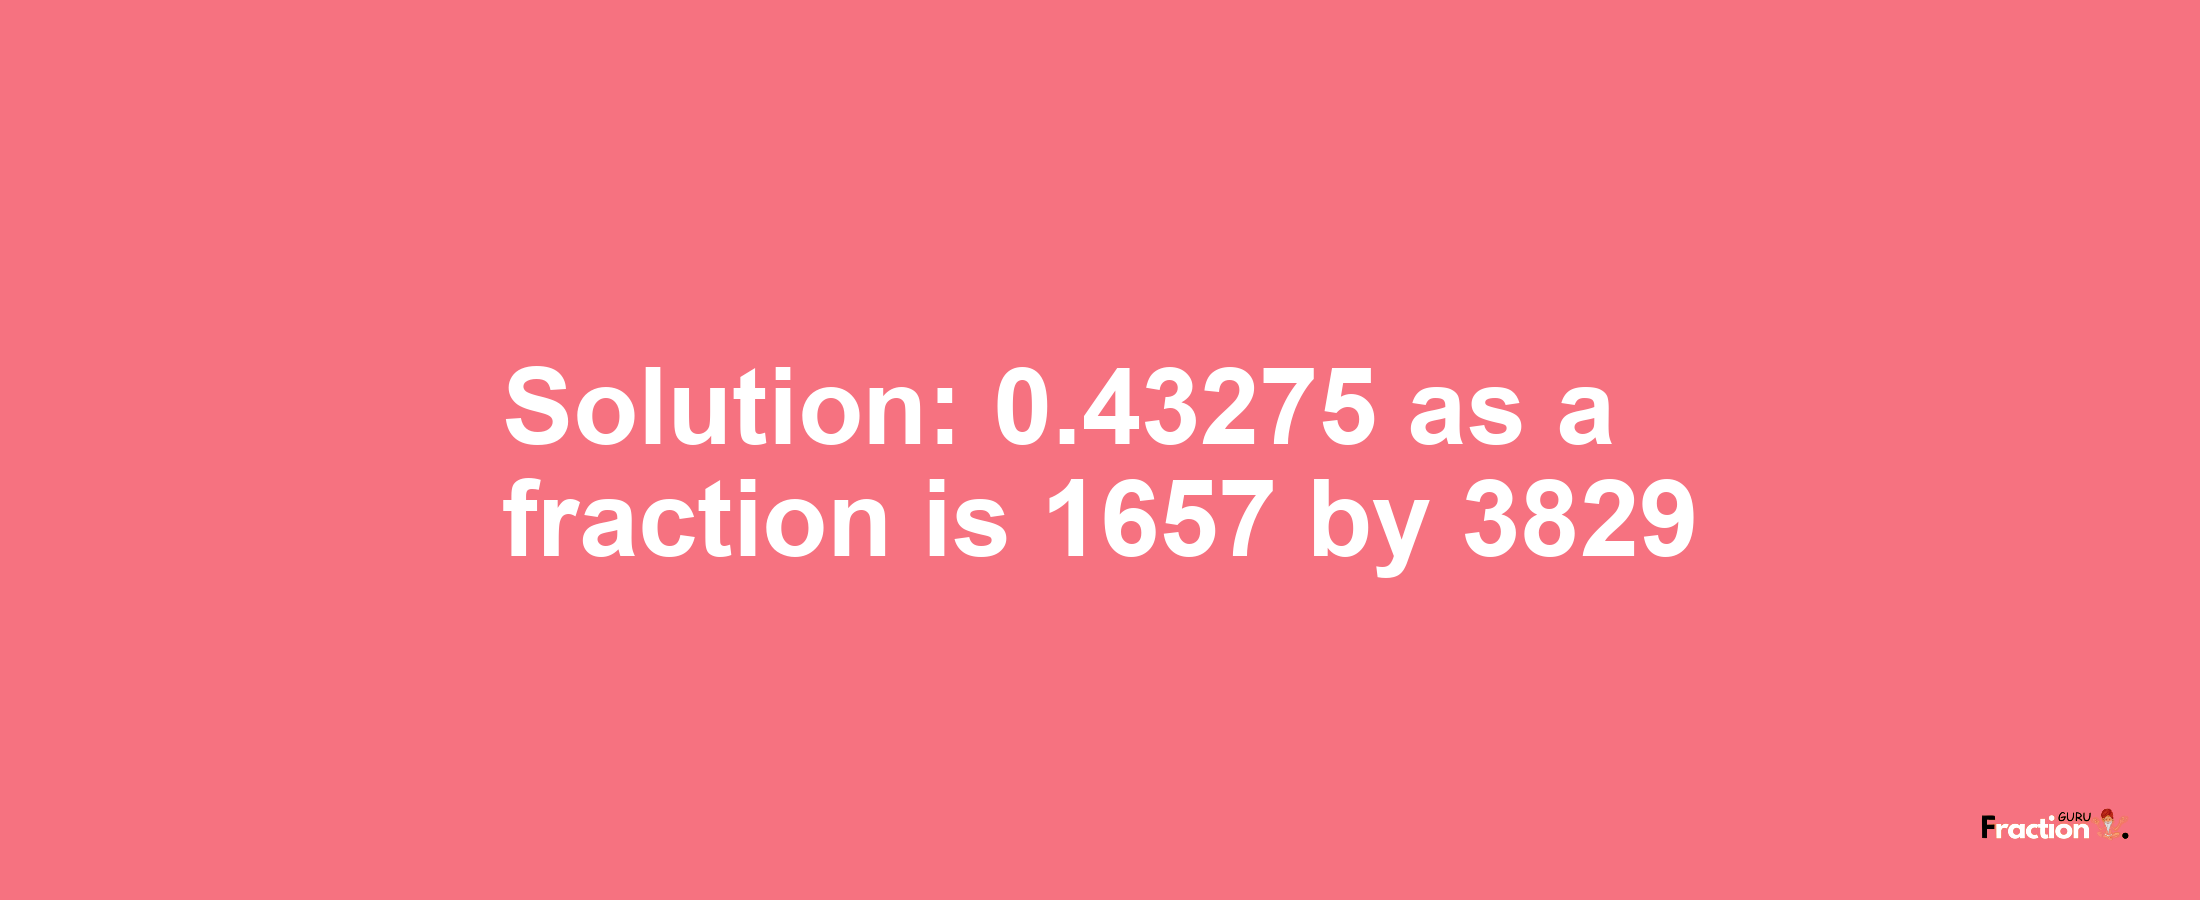 Solution:0.43275 as a fraction is 1657/3829